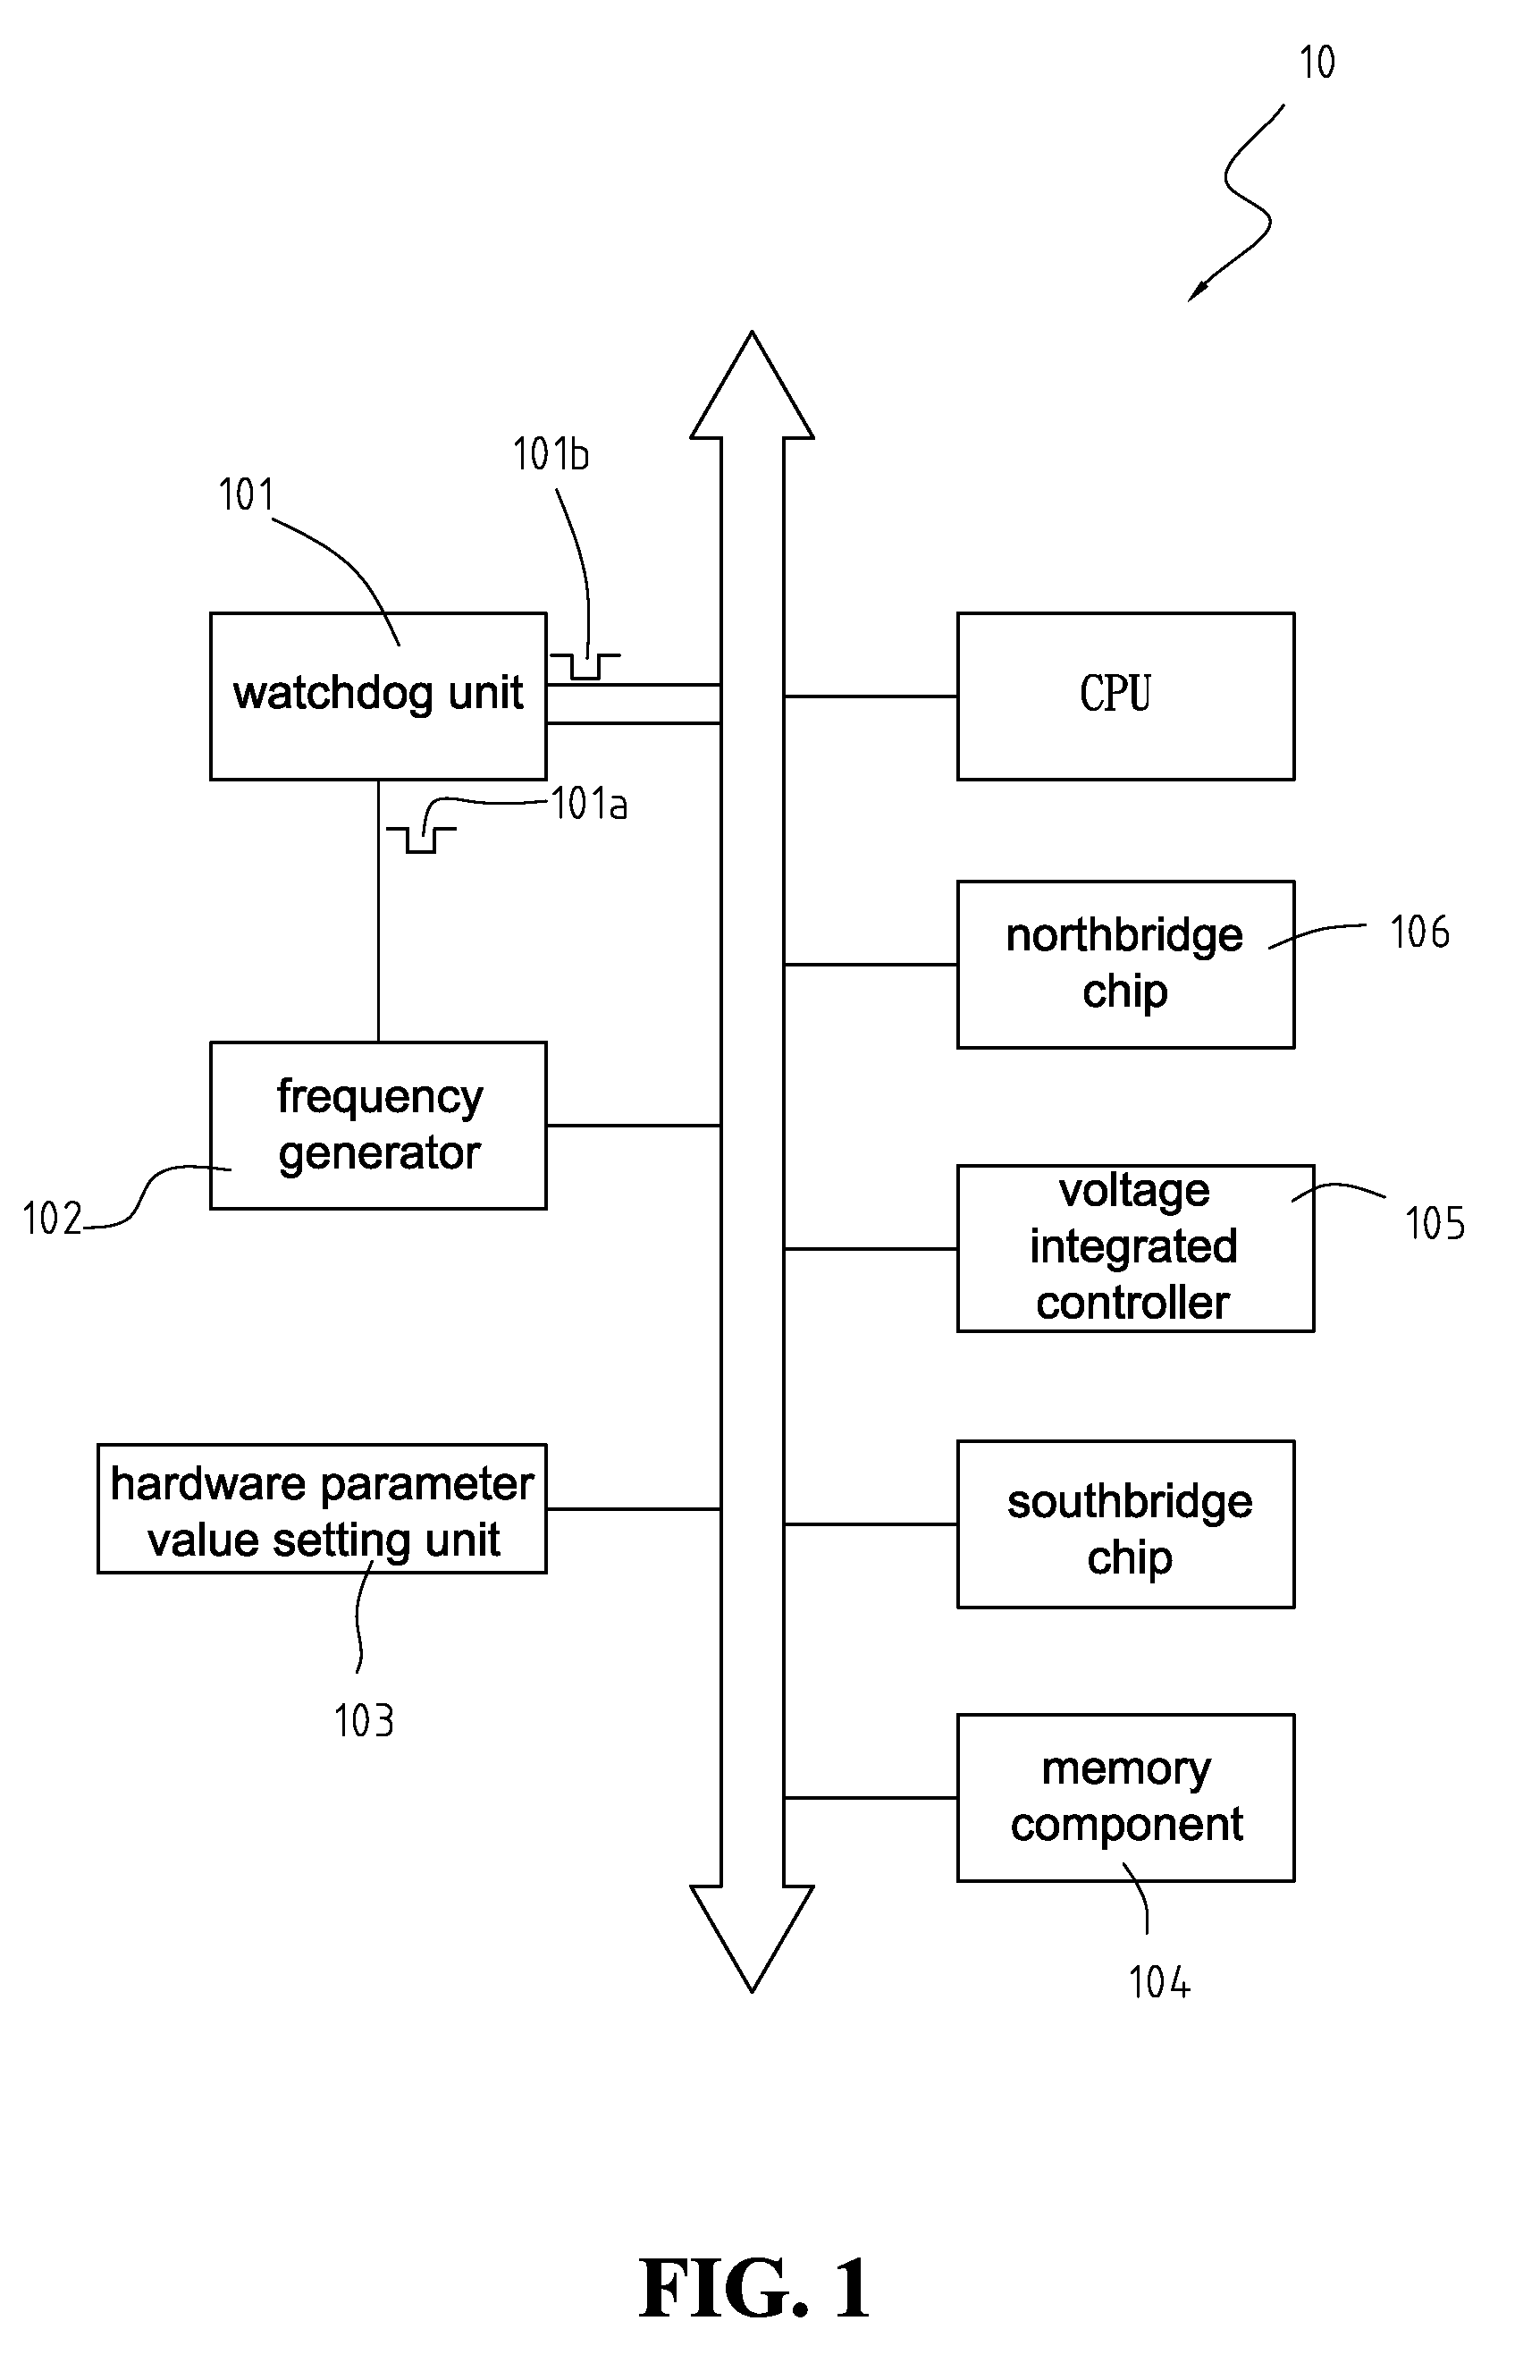 Computer motherboard with automatically adjusted hardware parameter value